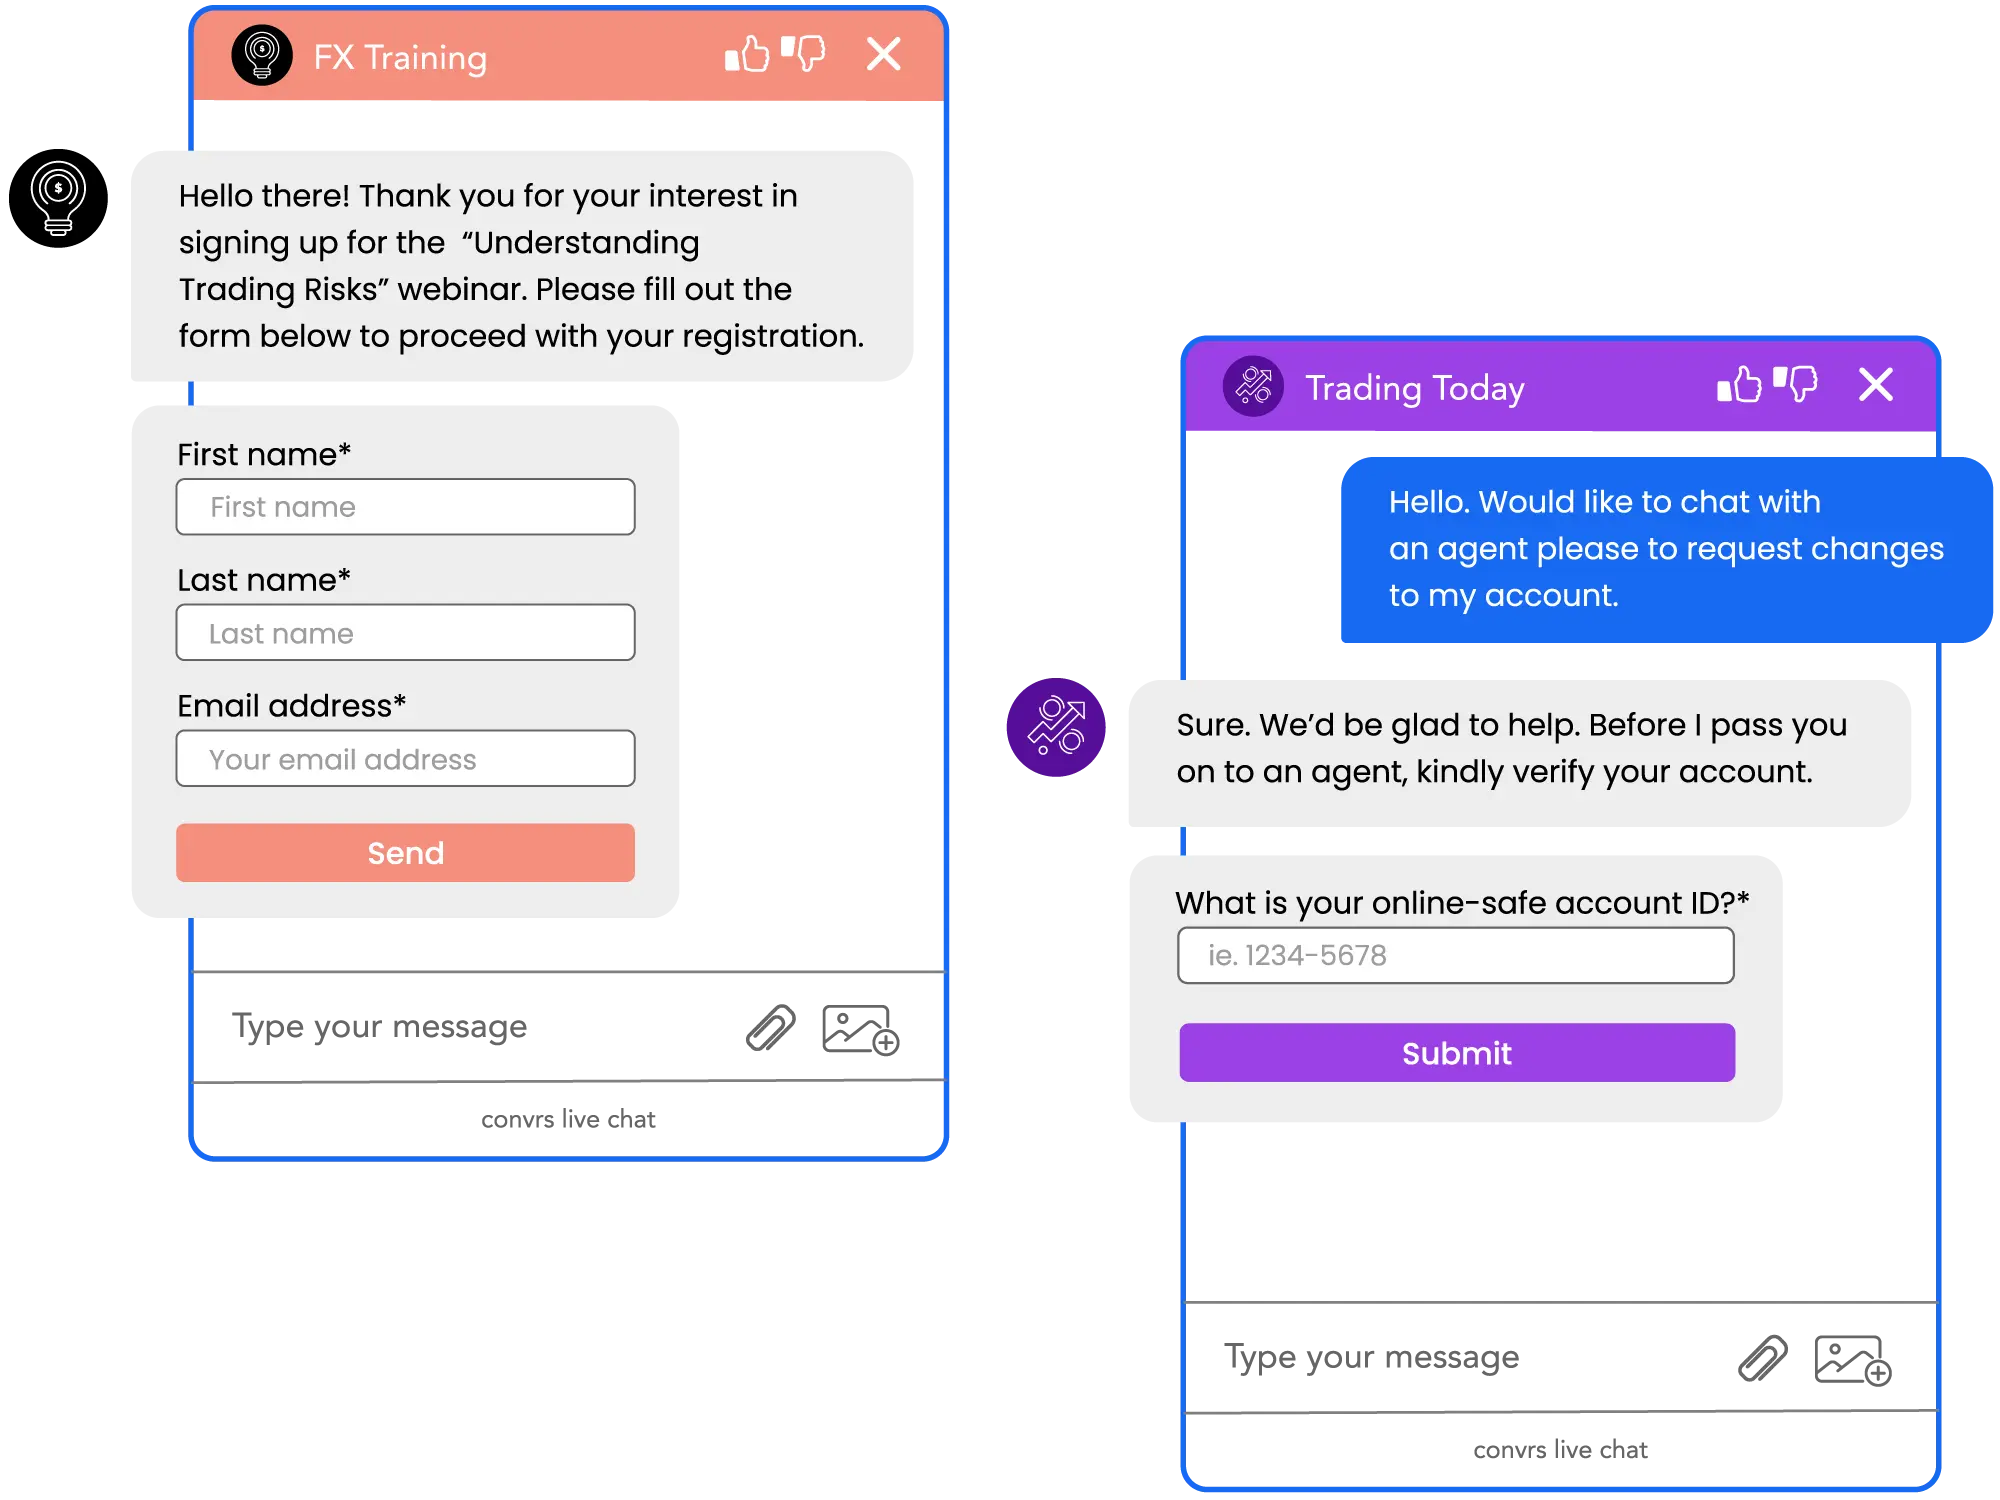 Examples of Convrs Web Chat message flows with custom forms that enable automated data collection and processing